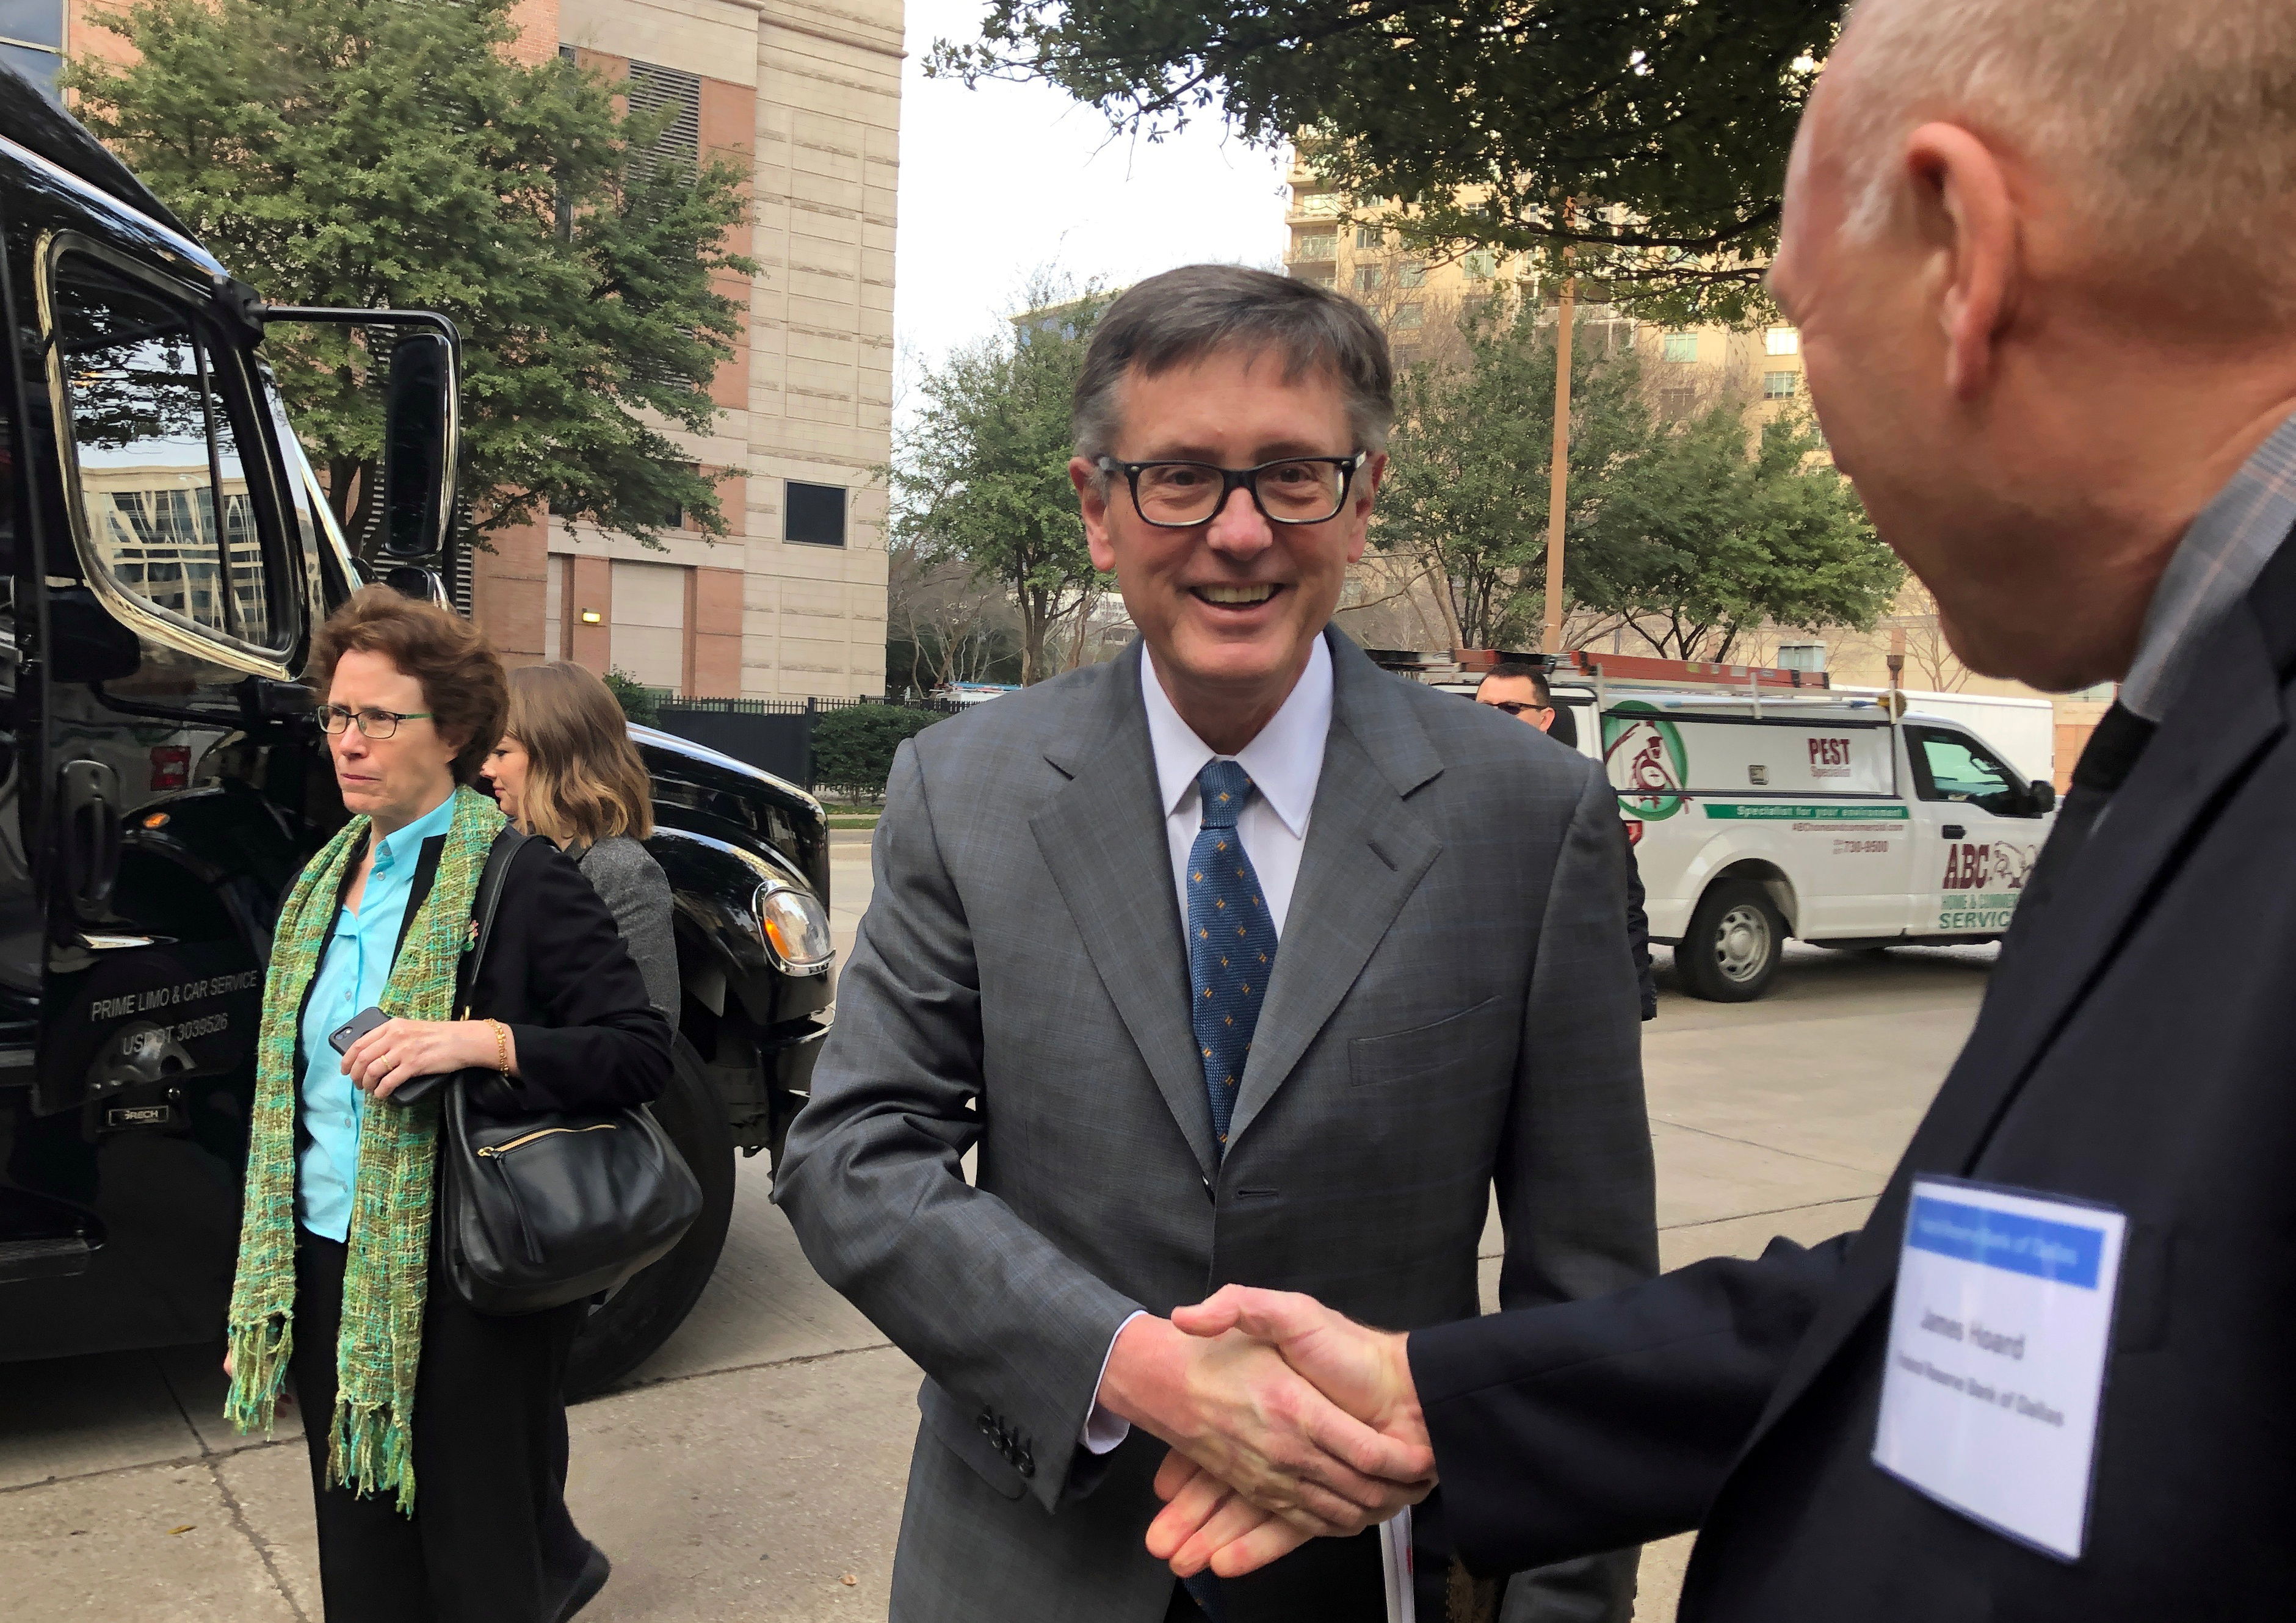 Federal Reserve Vice Chairman Richard Clarida, greets a member of the Dallas Fed staff before boarding a bus to tour South Dallas as part of a community outreach by U.S. central bankers, in Dallas, Texas, U.S., February 25, 2019.   REUTERS/Ann Saphir/Files